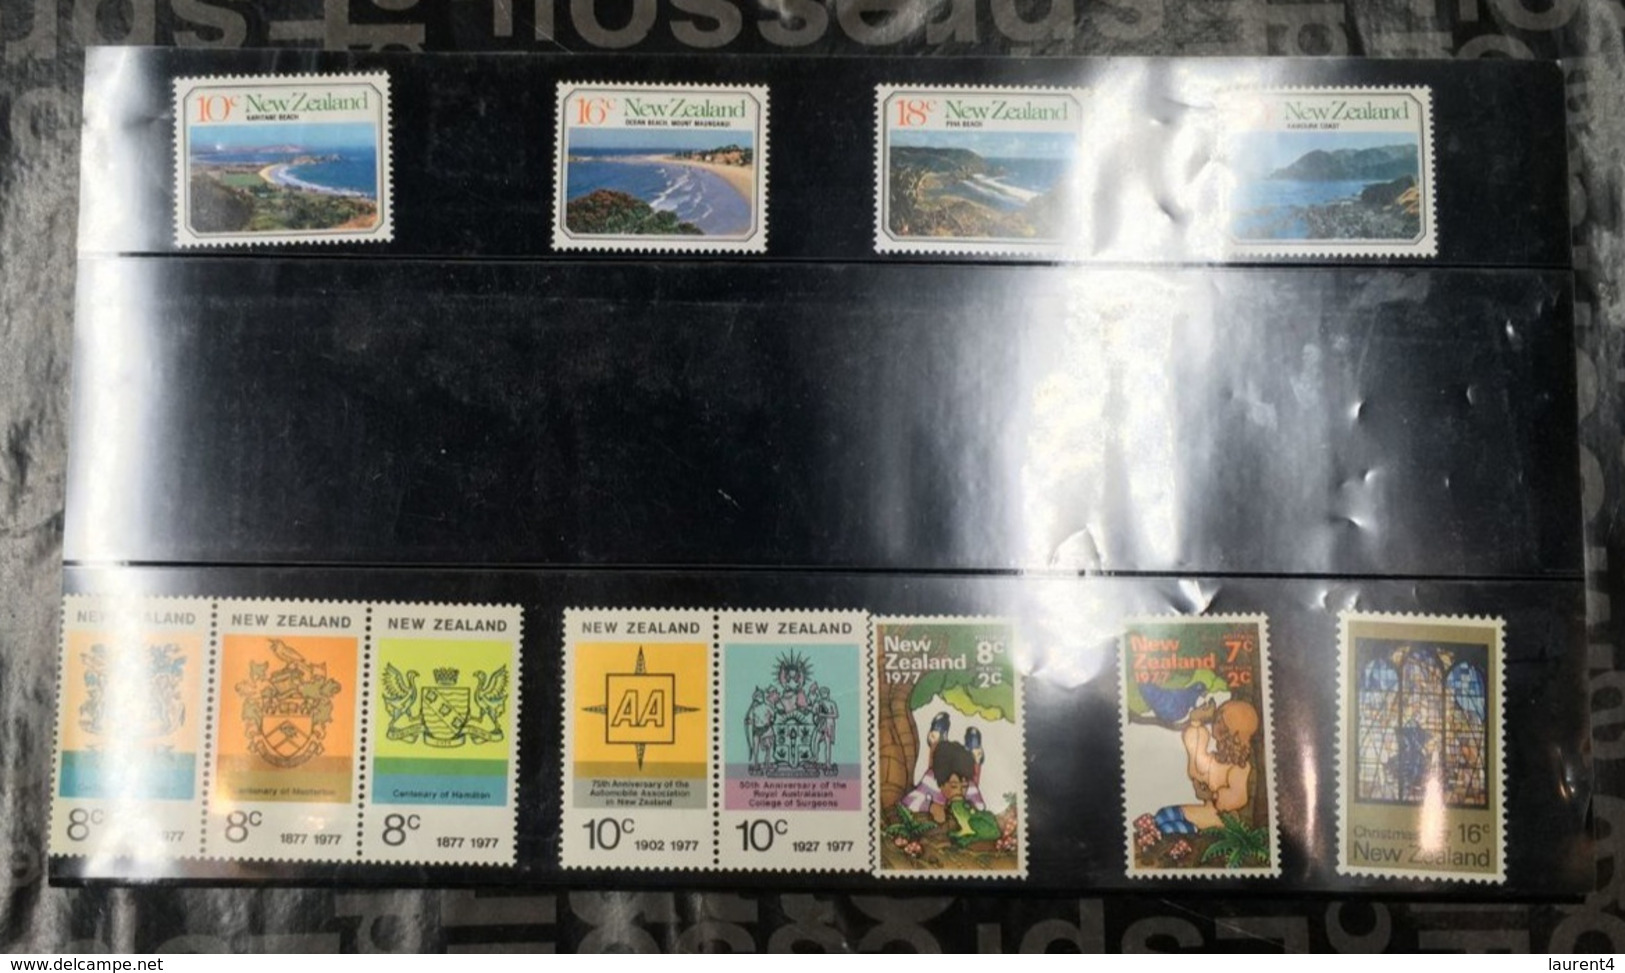 (stamps 8/8/2020) Canada - 1973 Presentation Folder With Stamp + Extra Page (as Seen) - Canada Post Year Sets/merchandise